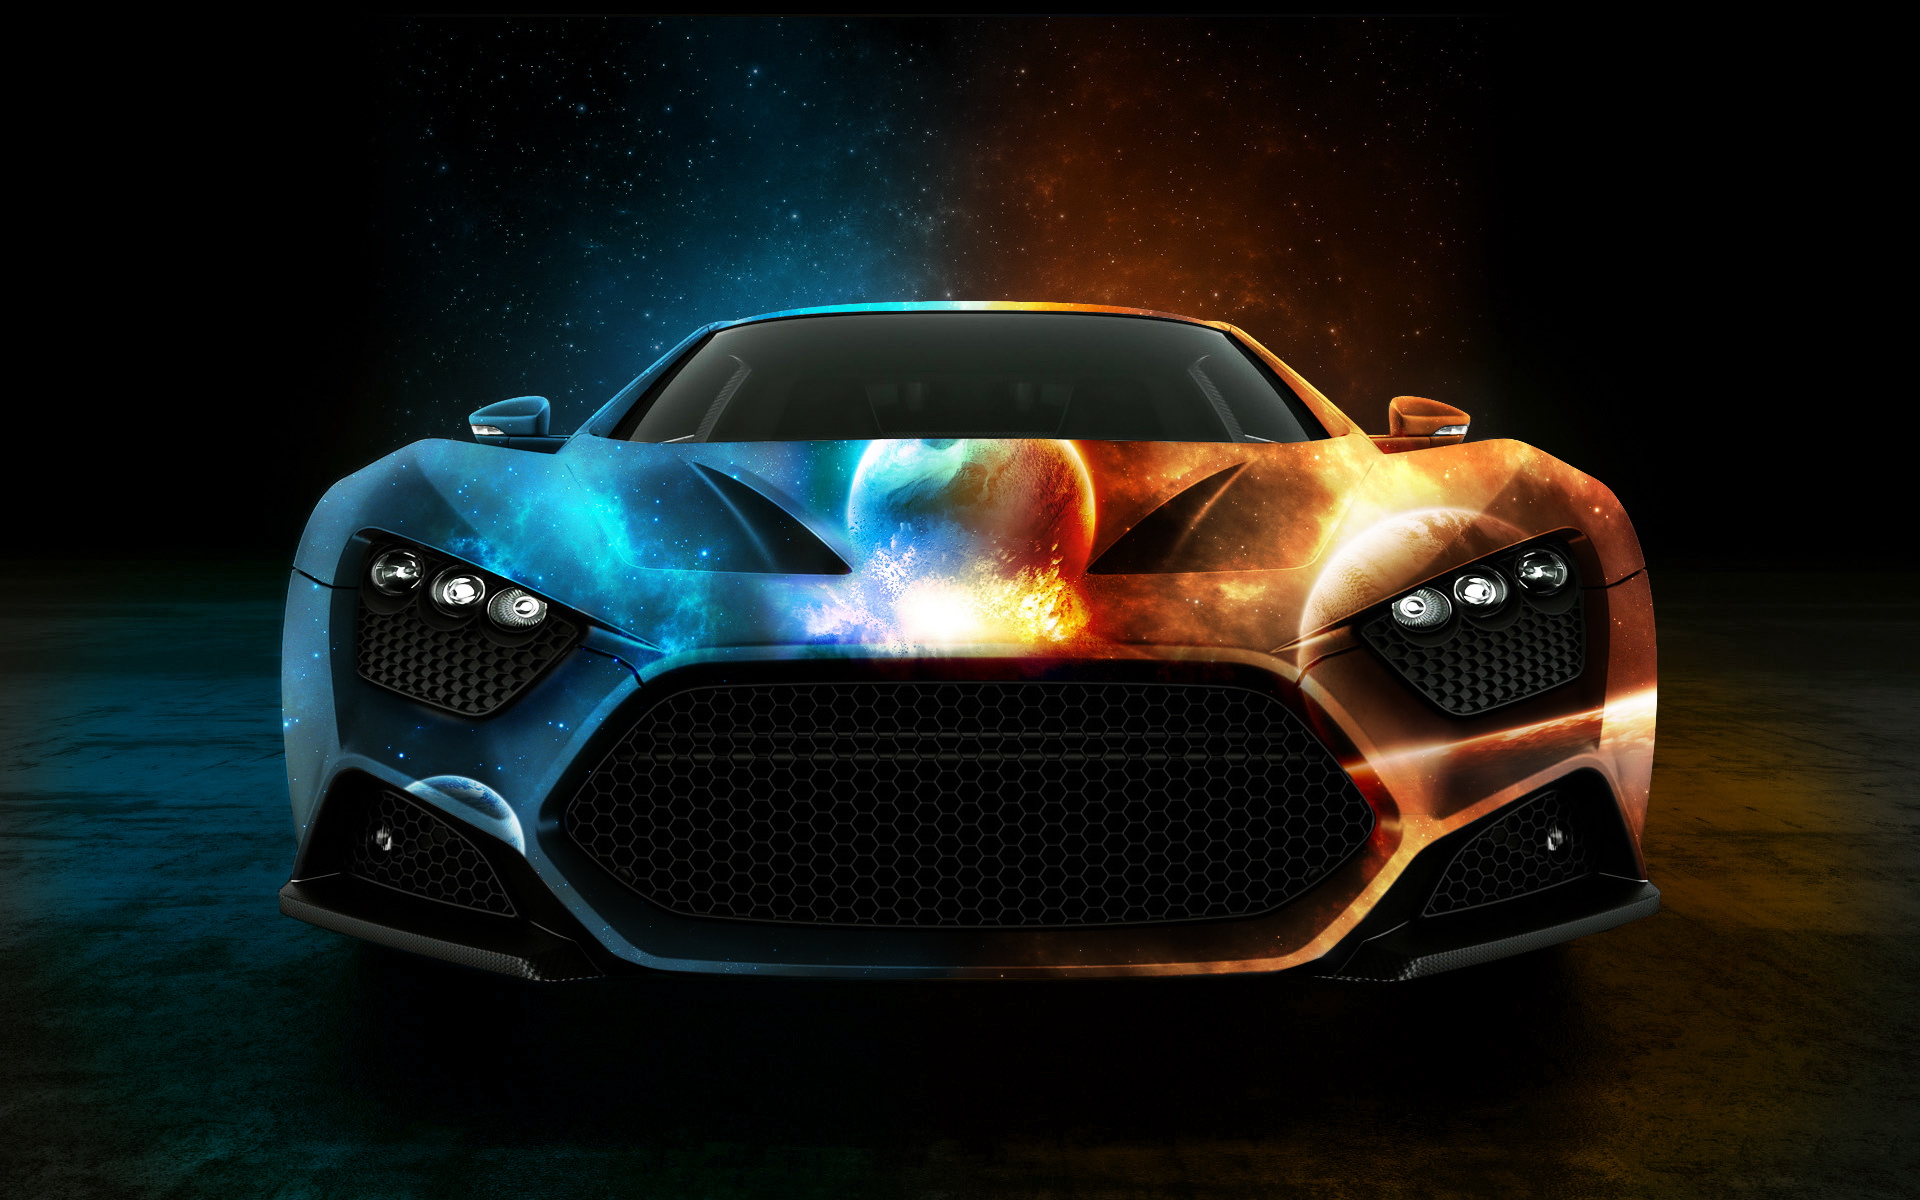 Cool car background images danaspeh.top